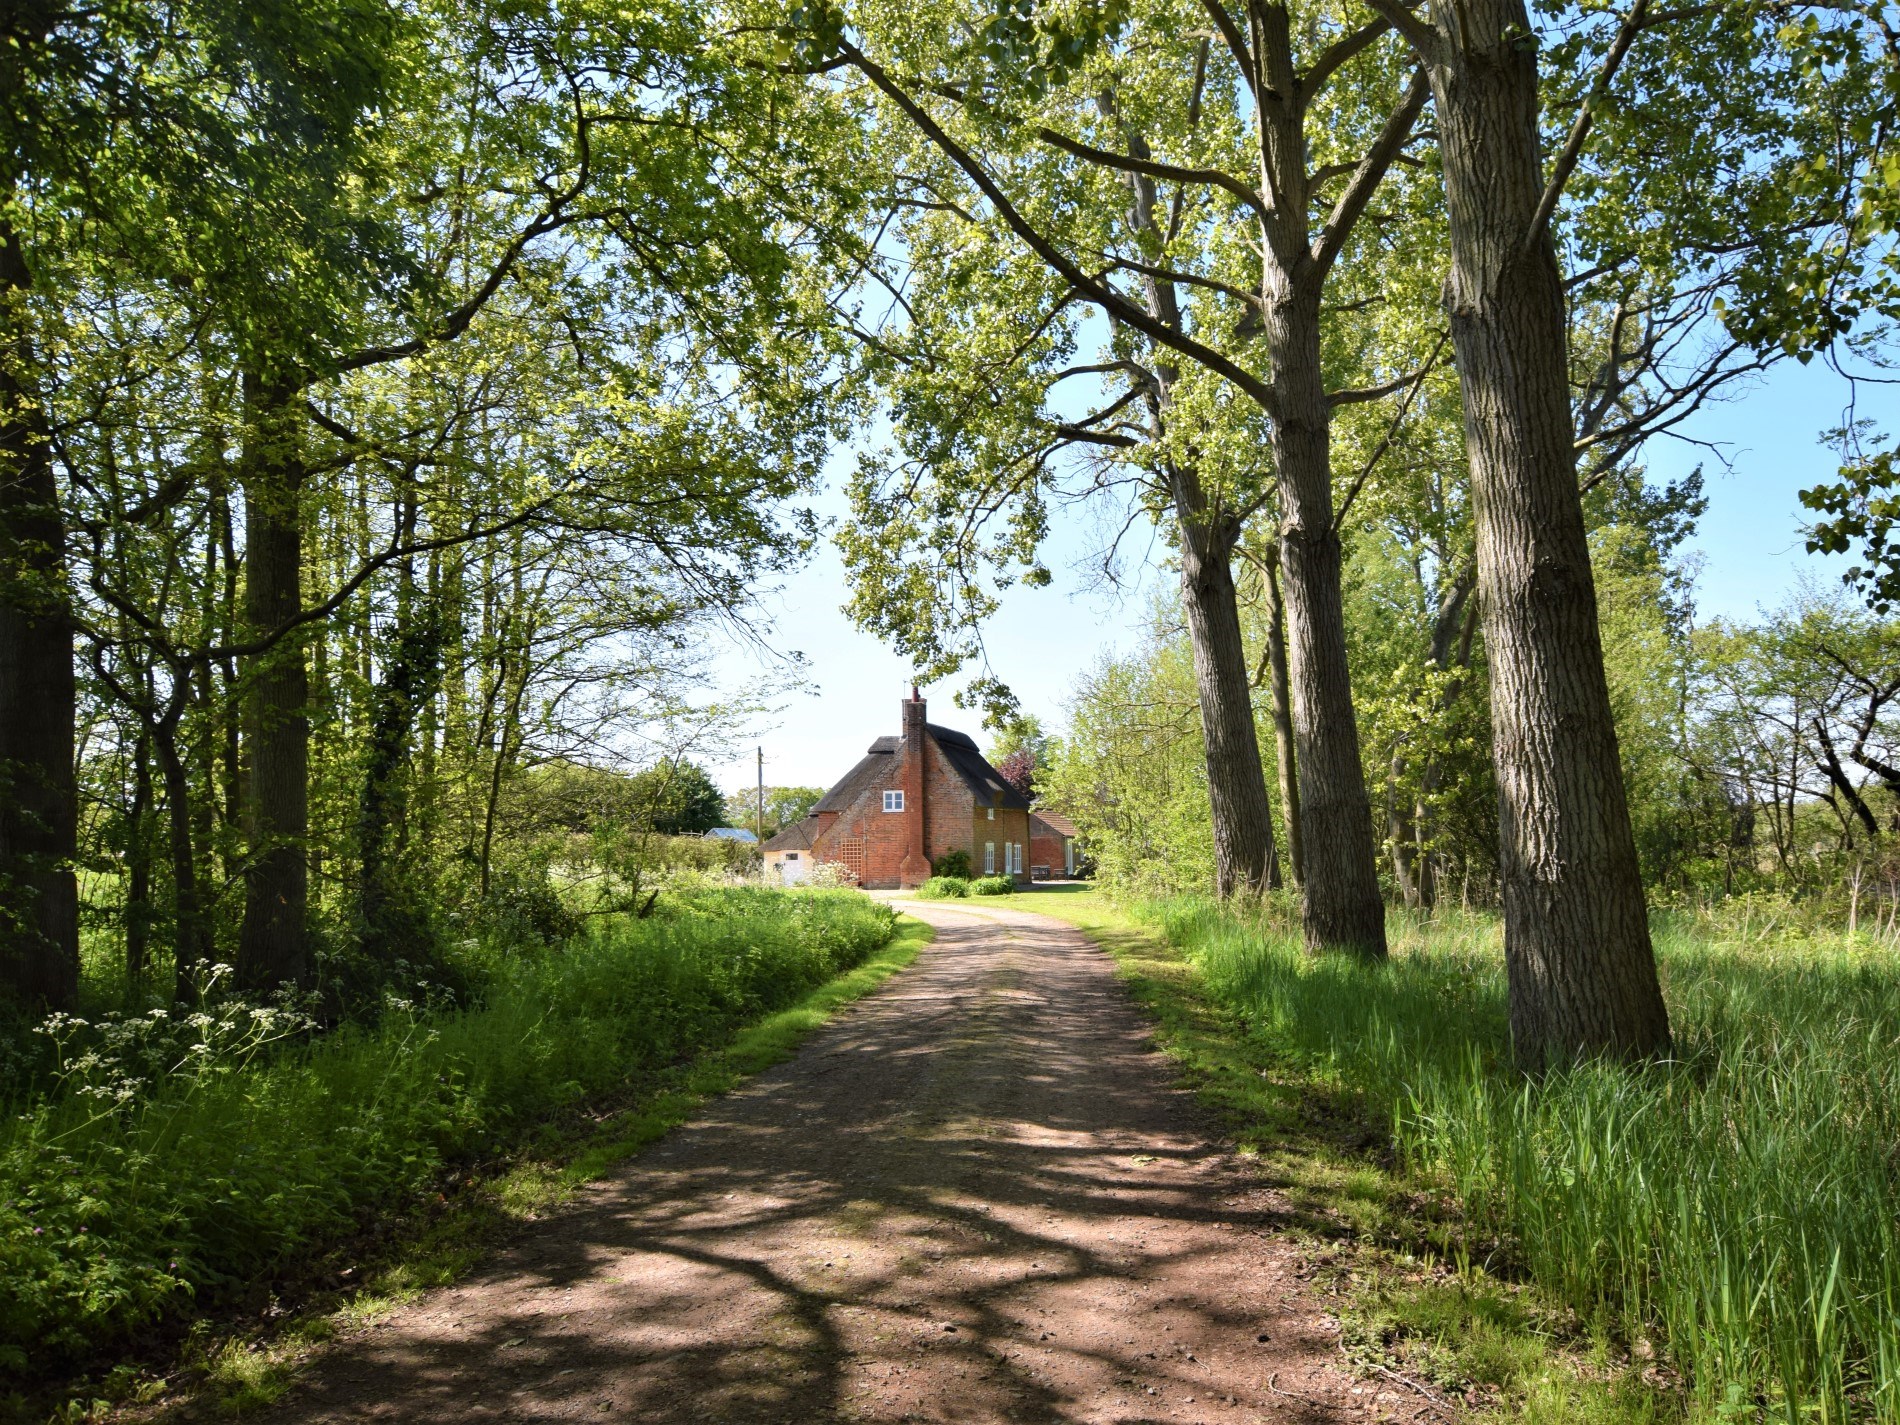 The treelined approach to the cottage